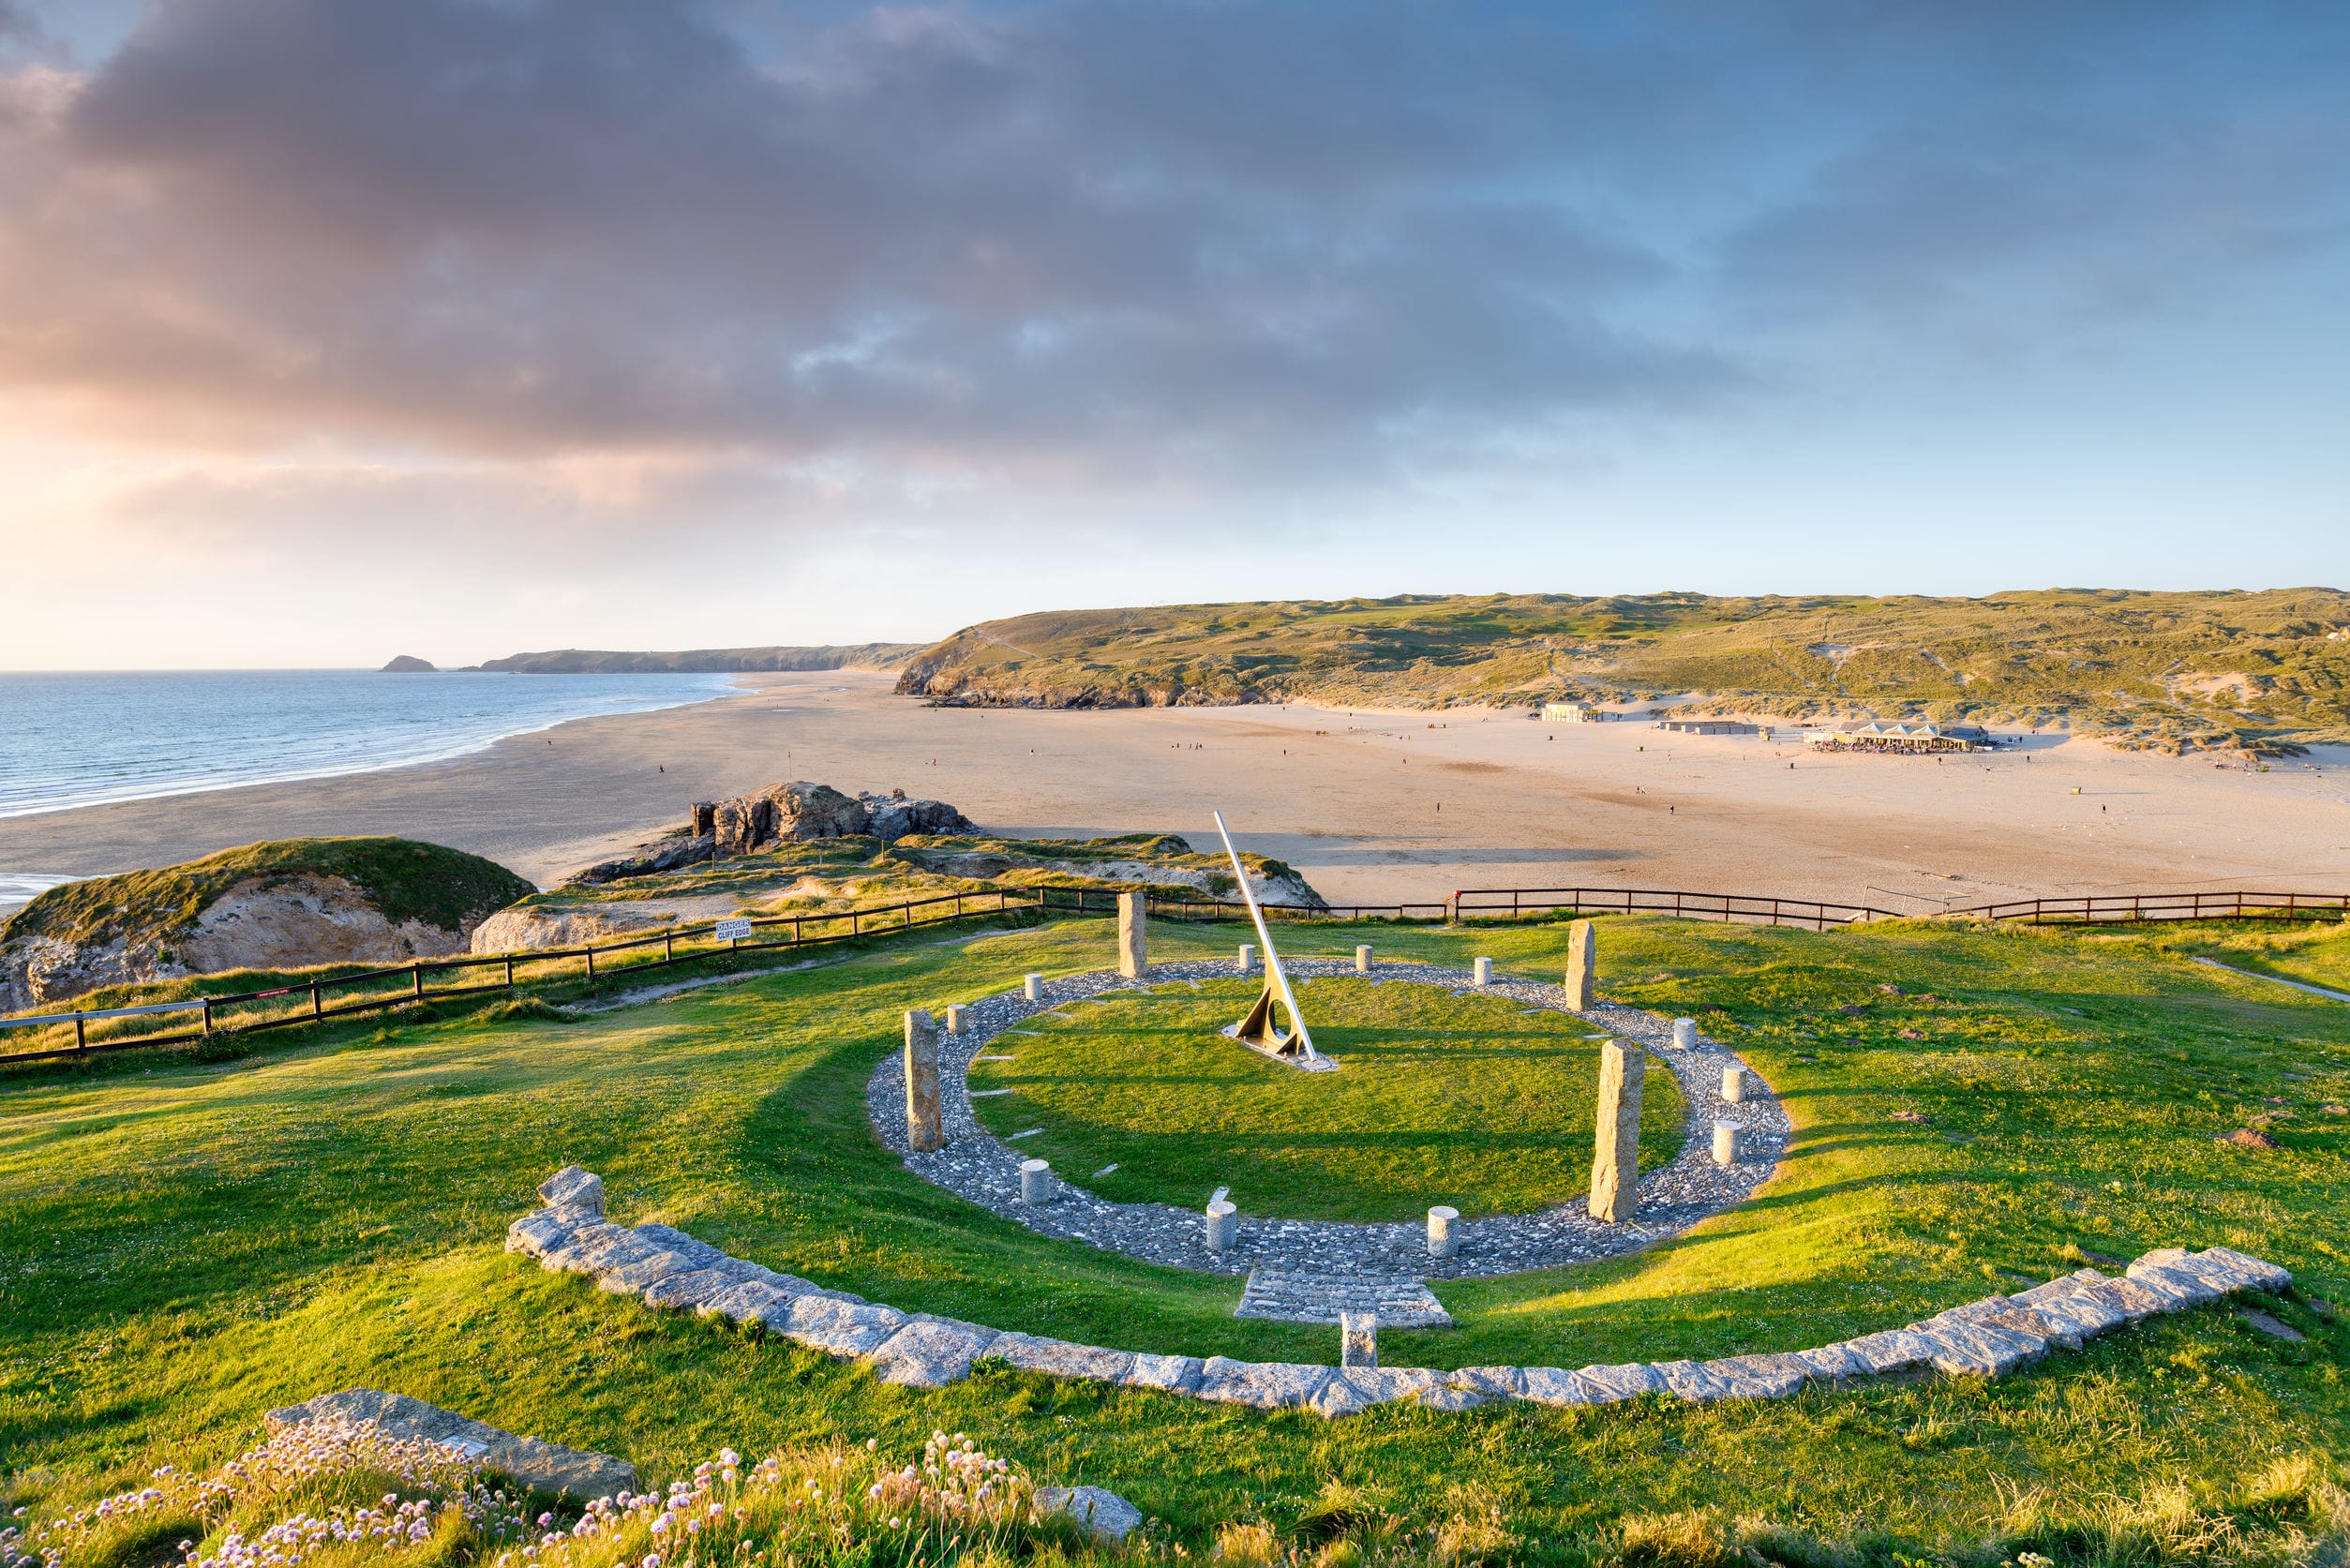 A giant sundial above the beach at Perranporth in Cornwall